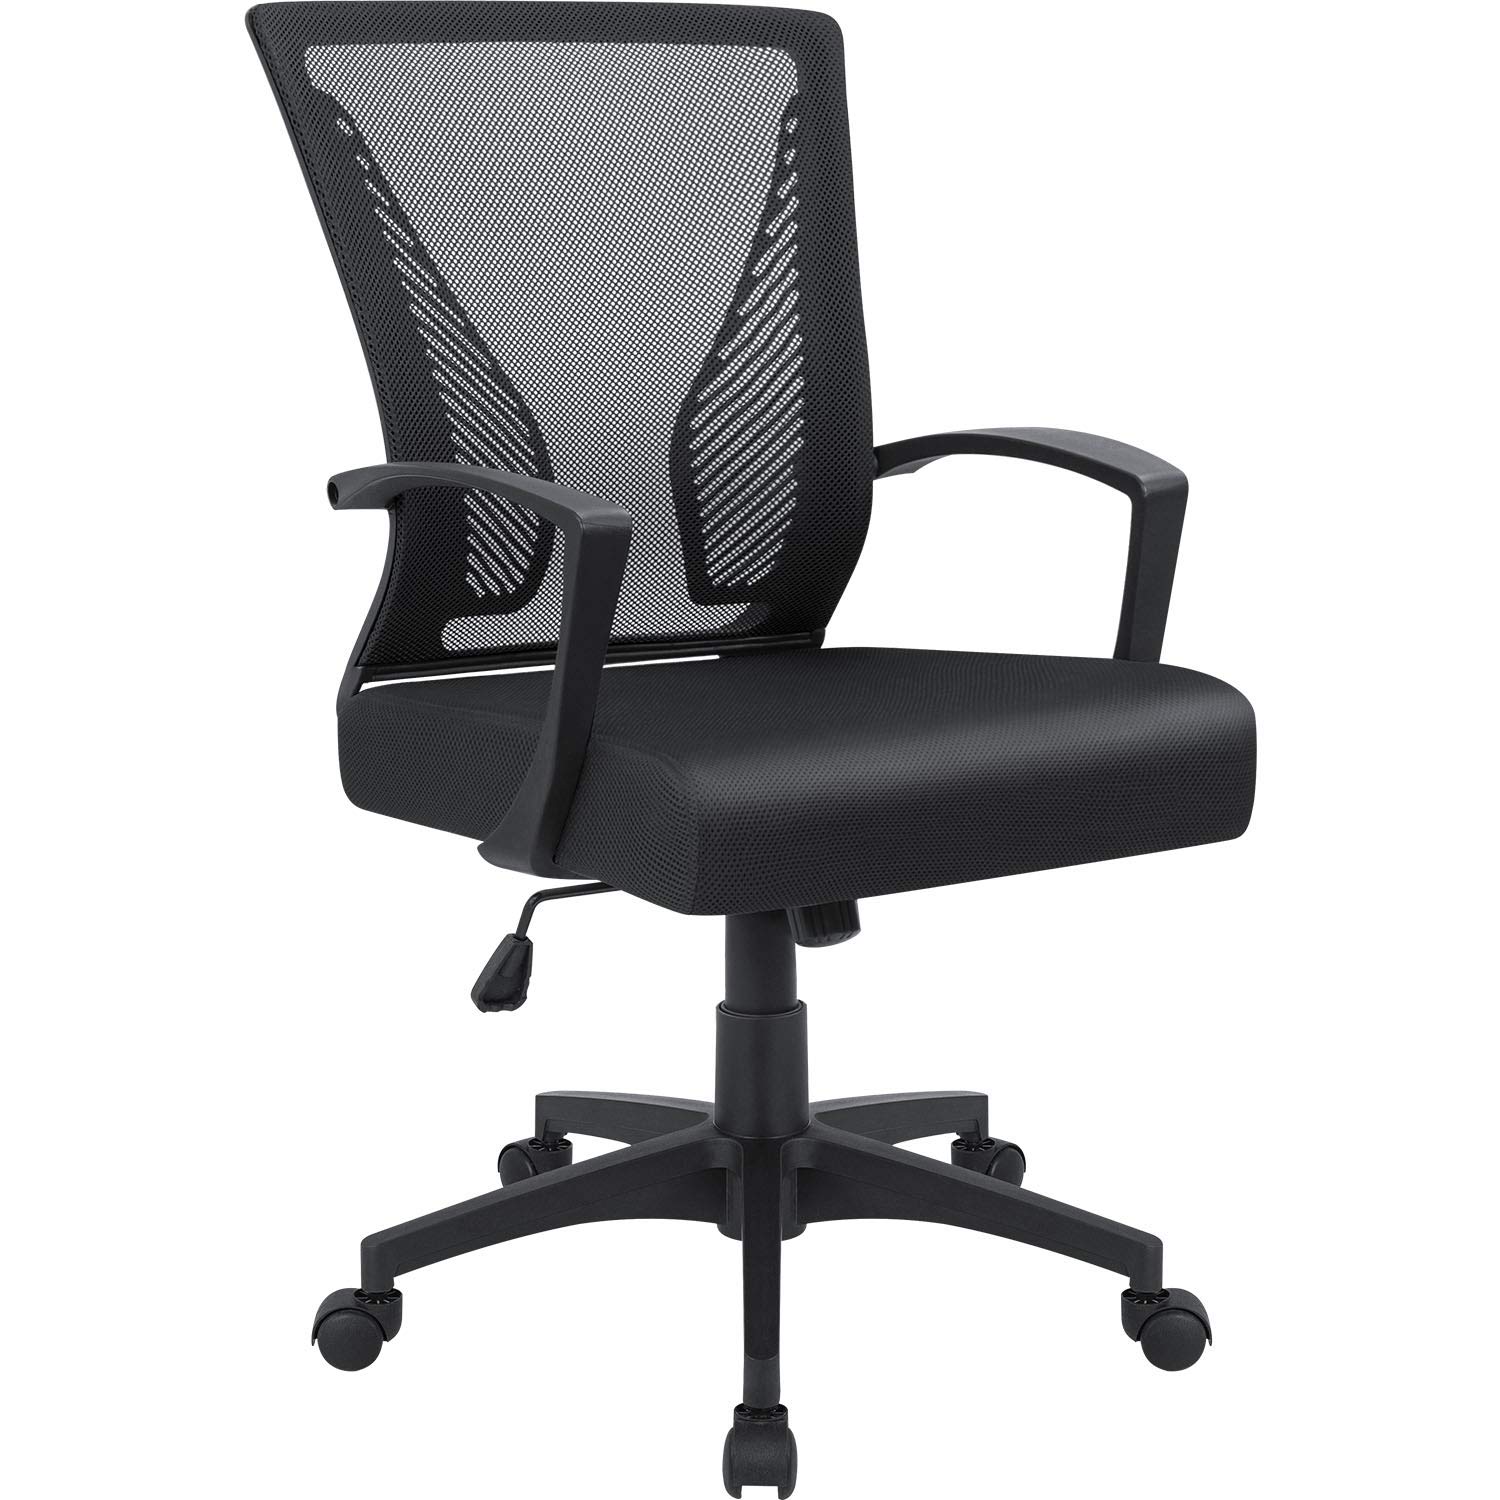 Lacoo Mid-Back Office Desk Chair Ergonomic Mesh Task Chair with Lumbar Support, Black - image 1 of 6